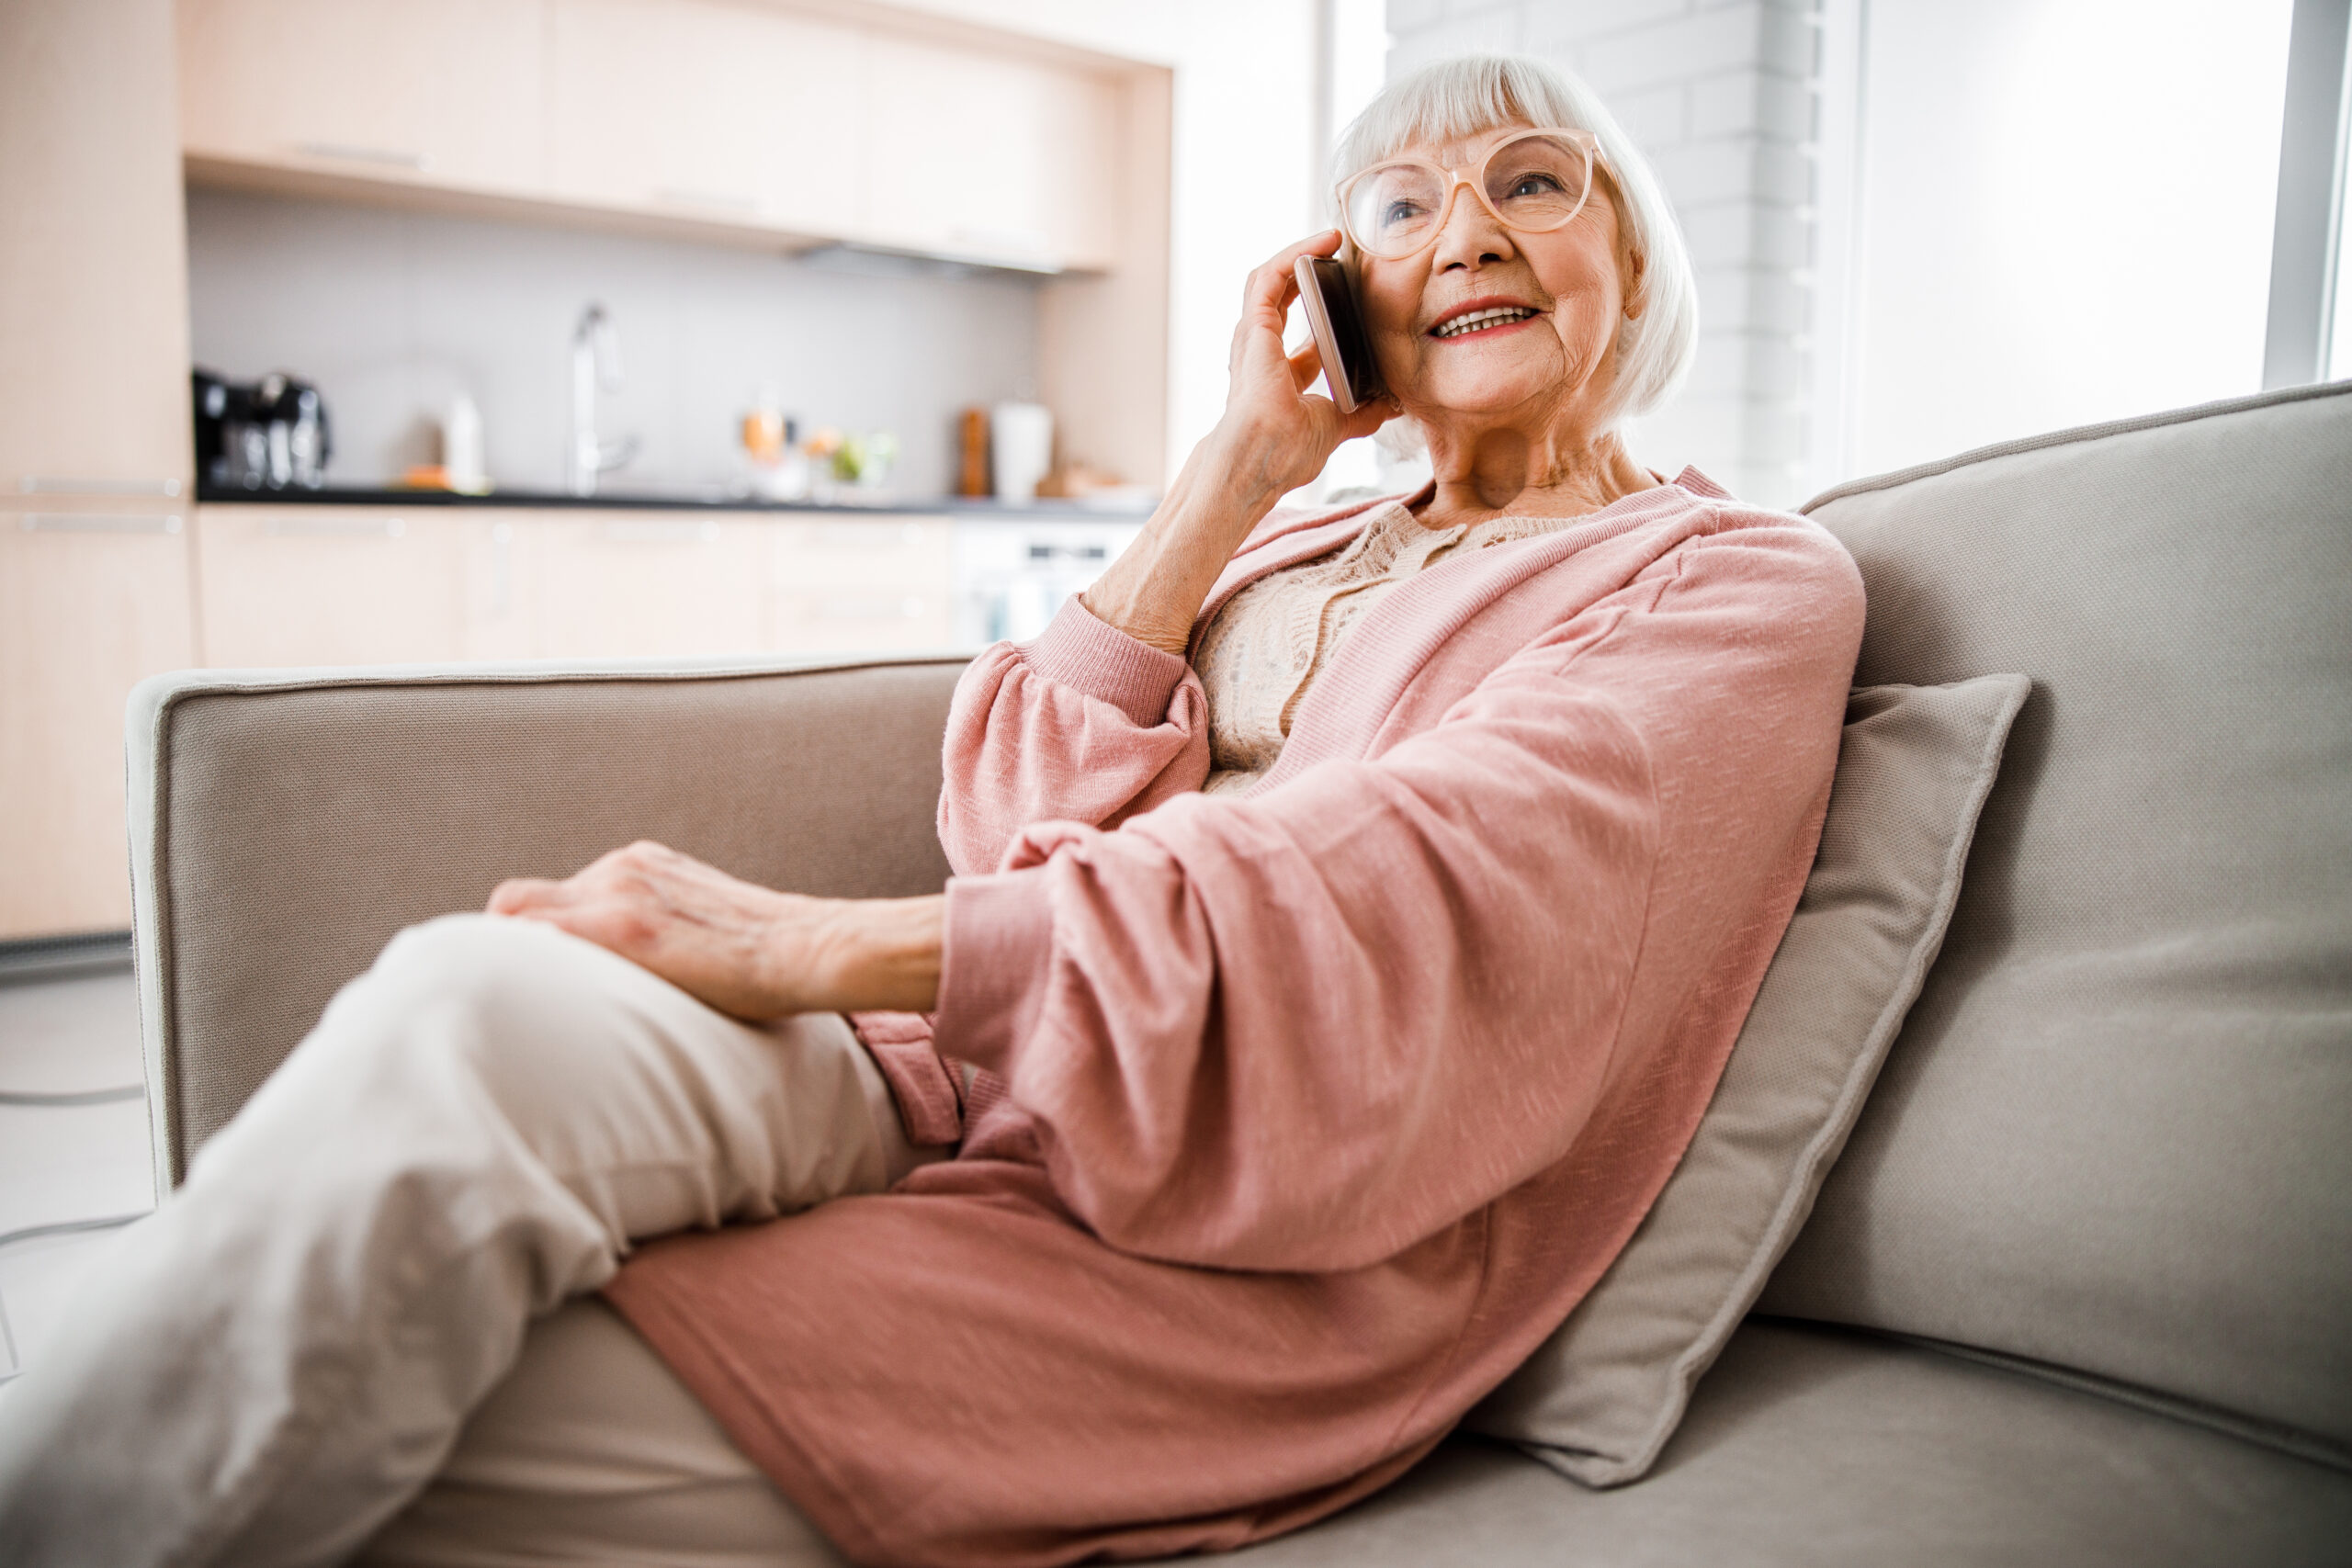 Cheerful senior woman sitting on couch and having phone conversation stock photo